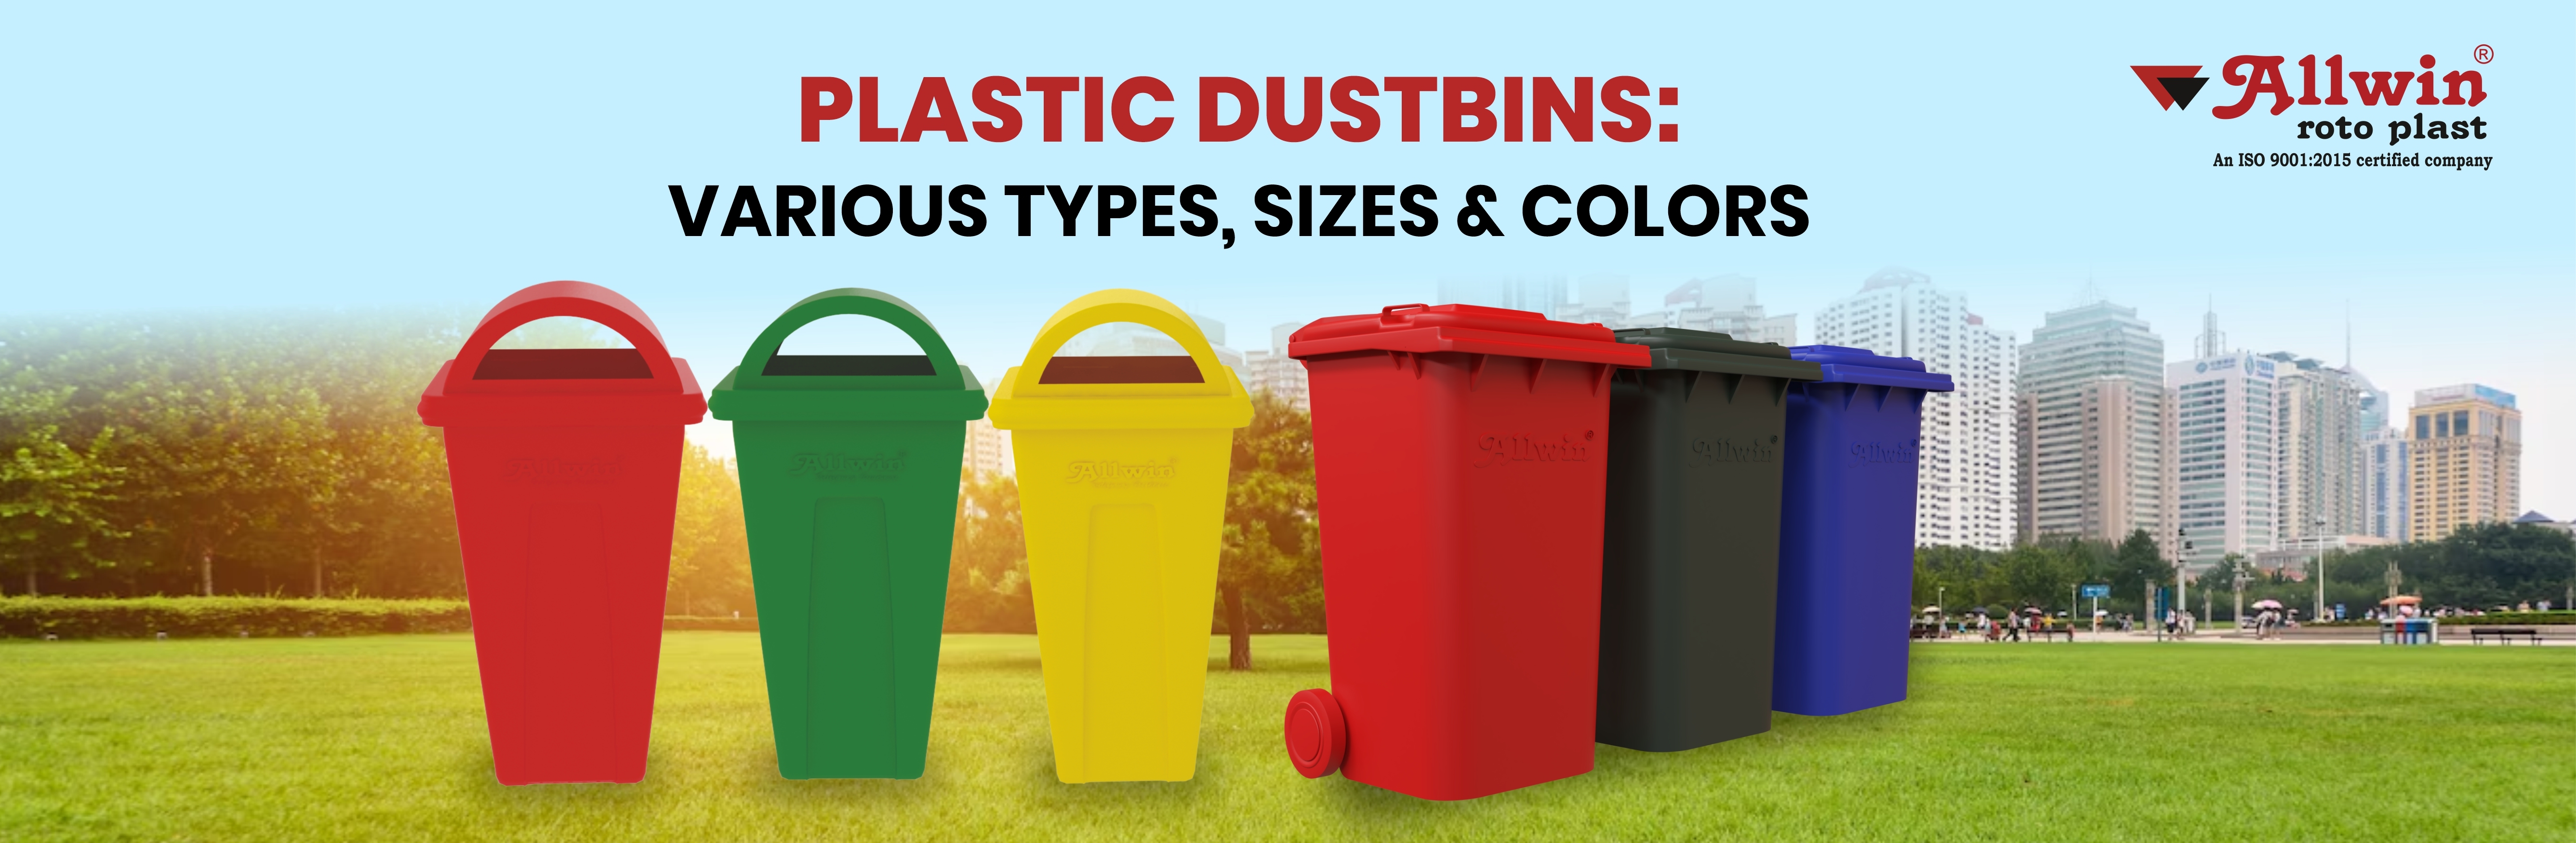 PLASTIC DUSTBINS: wAllwin
VARIOUS TYPES, SIZES & COLORS

An ISO 9001:2015 certified company

     
 

    

rrr

      

      

  
 
 
 

        
 

 

- ’ »
- » “aw
. -
~. ~ Sy $ . ® LPF
- ATR gd + 5 ¢
Se wn Te, - Suny, ) 1
ee - a. - - .- e
Re. See ’ . * . £ -
- - = . . . gS EE vee
ll - on l'on 8 V Loe a
* Be ~ - - .- - - wr wll
.-» he — . ’ - - ® =
she aos = — SiESiE IES
a C- "& BR EF ~
. 0 — —- ''. 3 9 f= a -
She = = — ‘eu 3 L - —- .
.- . - 0 - of ! EB 2= =
Re wea - . 3 t = :
Shy a Sag «rn ’
LS — ae ' :
® Sn :

»

op a Te =
EE JR TT

i {a Tw,

 

.
.

a

a. 4